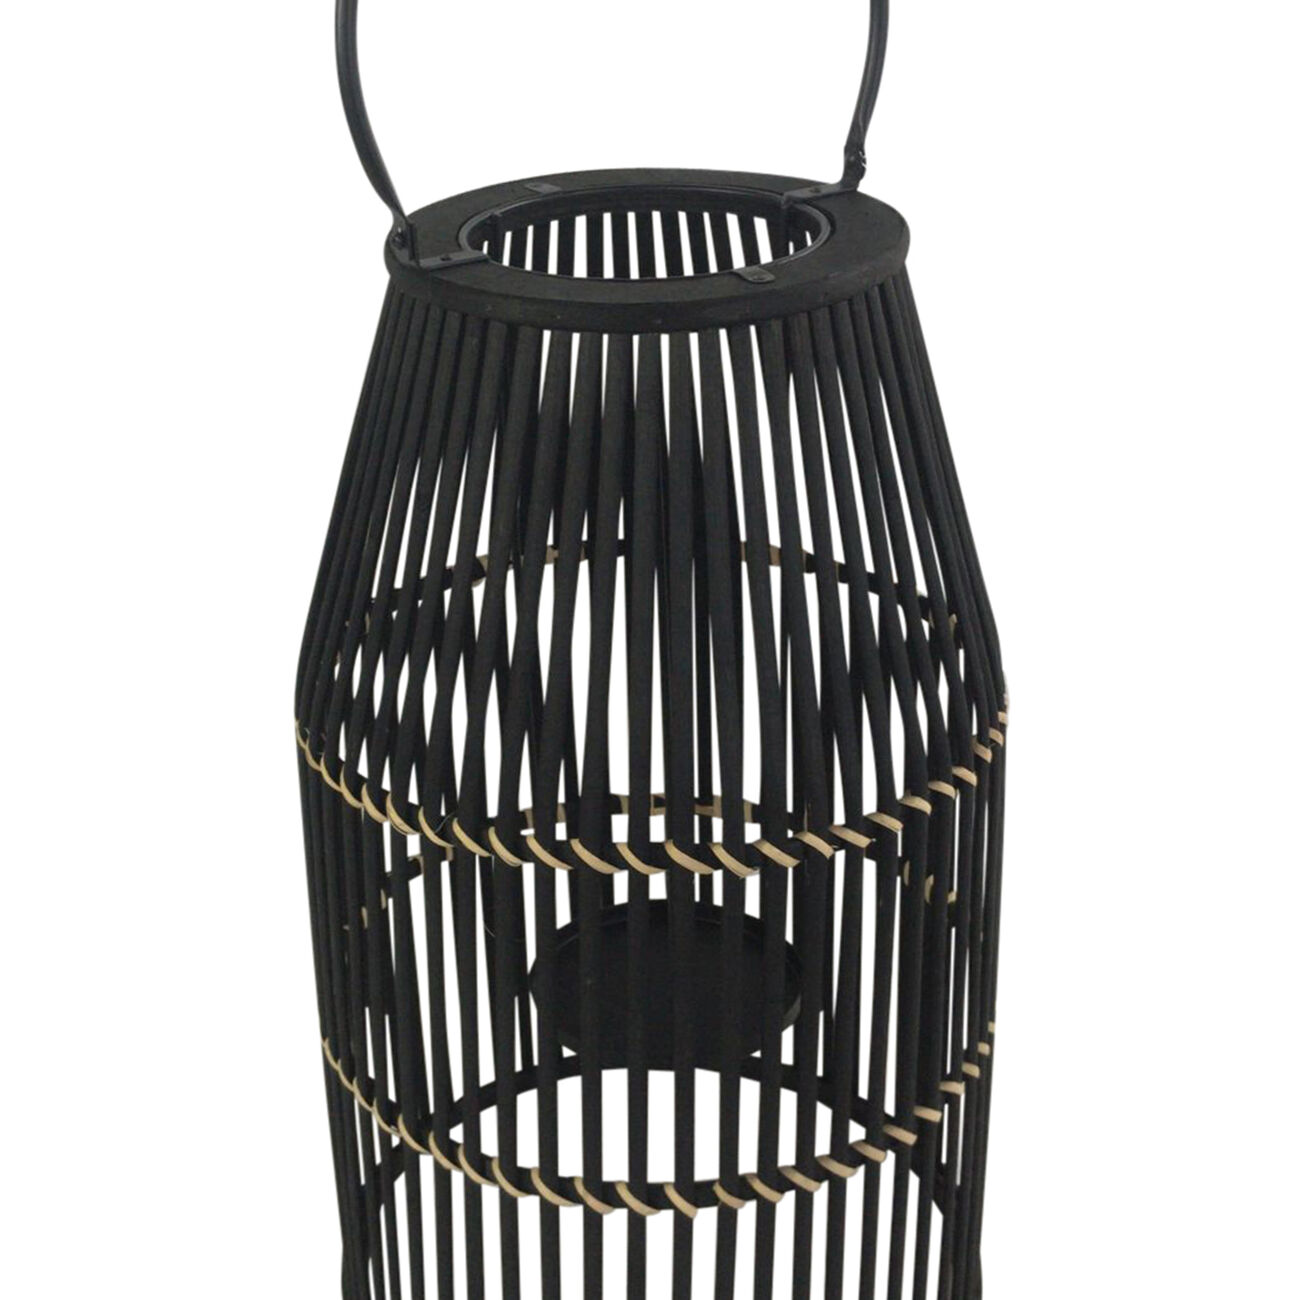 Decorative Drum Shaped Open Cage Bamboo Lantern, Small, Black